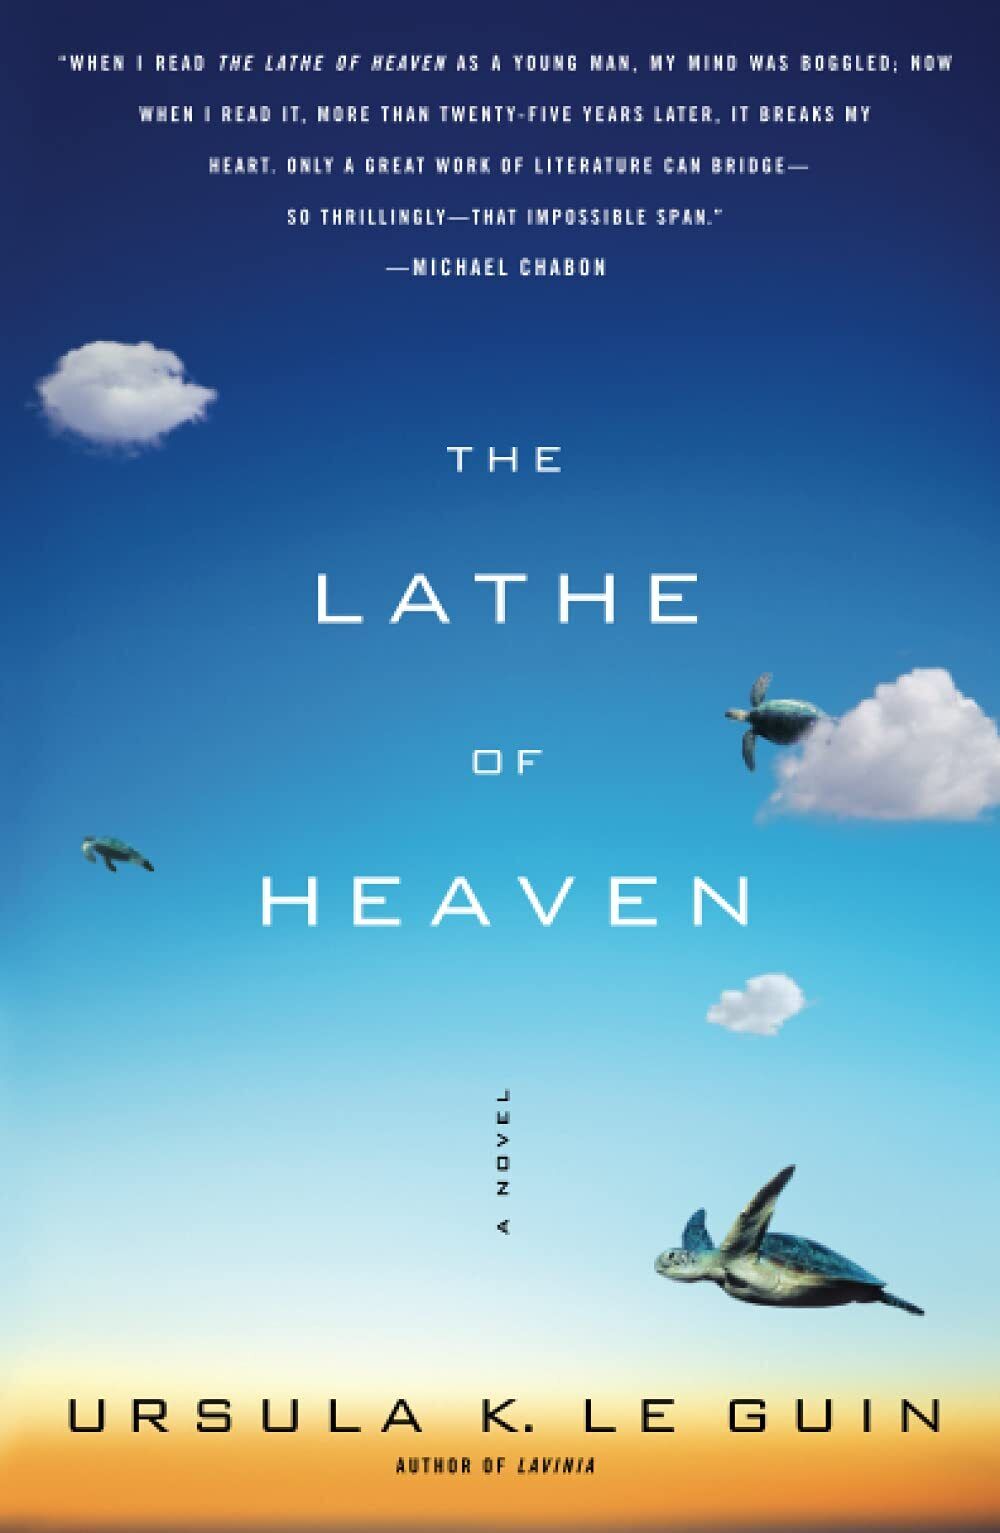 Cover art for The Lathe of Heaven, showing a blue sky with a few puffy clouds and some flying turtles.Picture